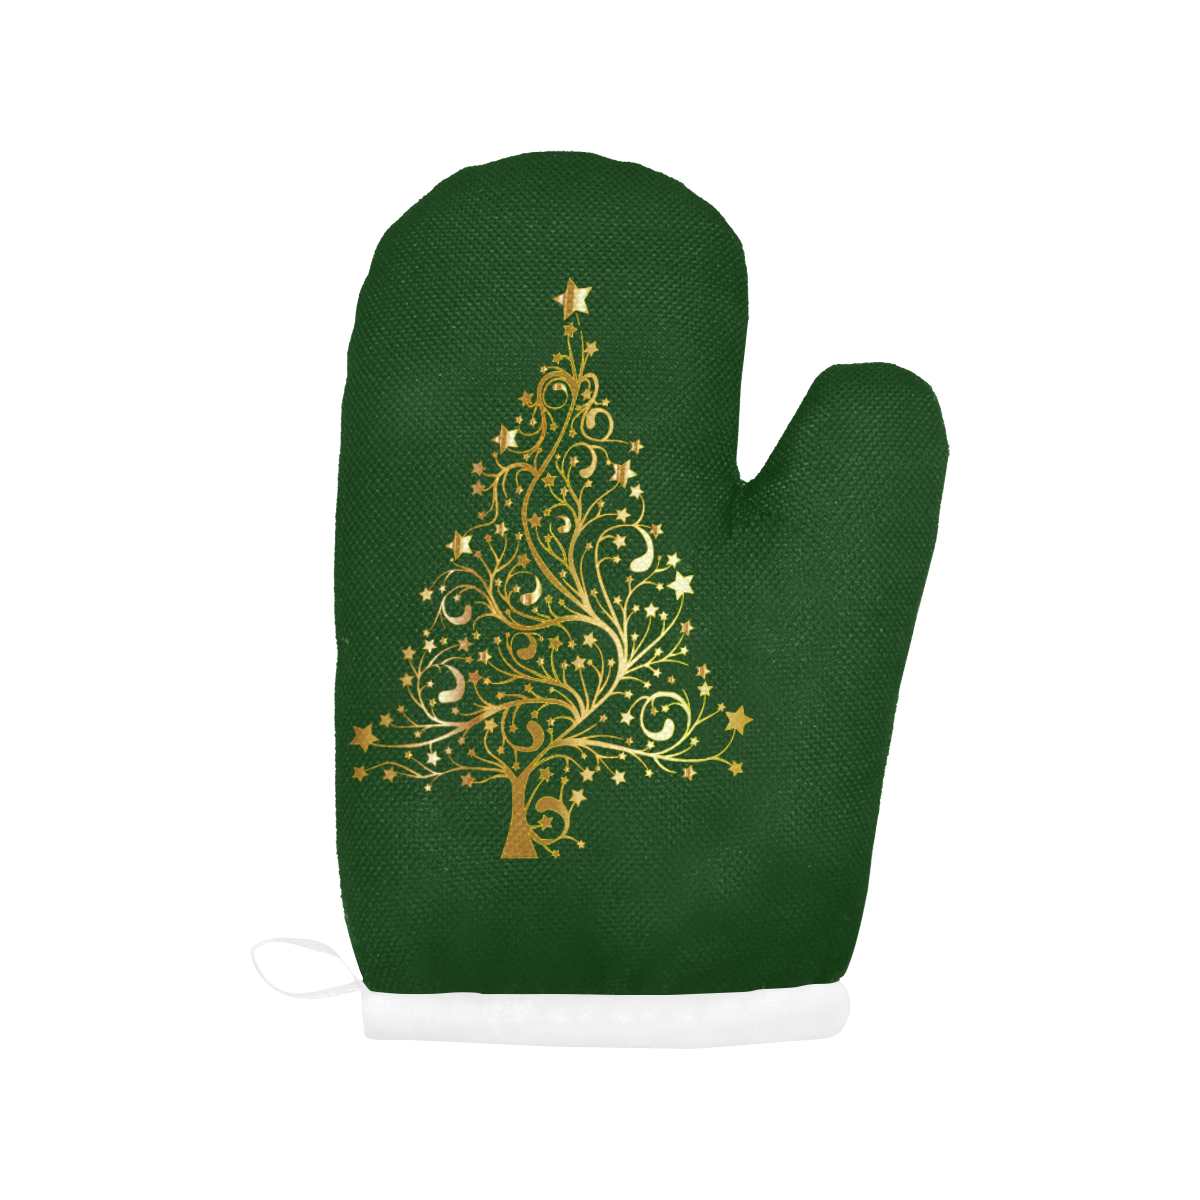 Golden Christmas Tree on Green Oven Mitt (Two Pieces)